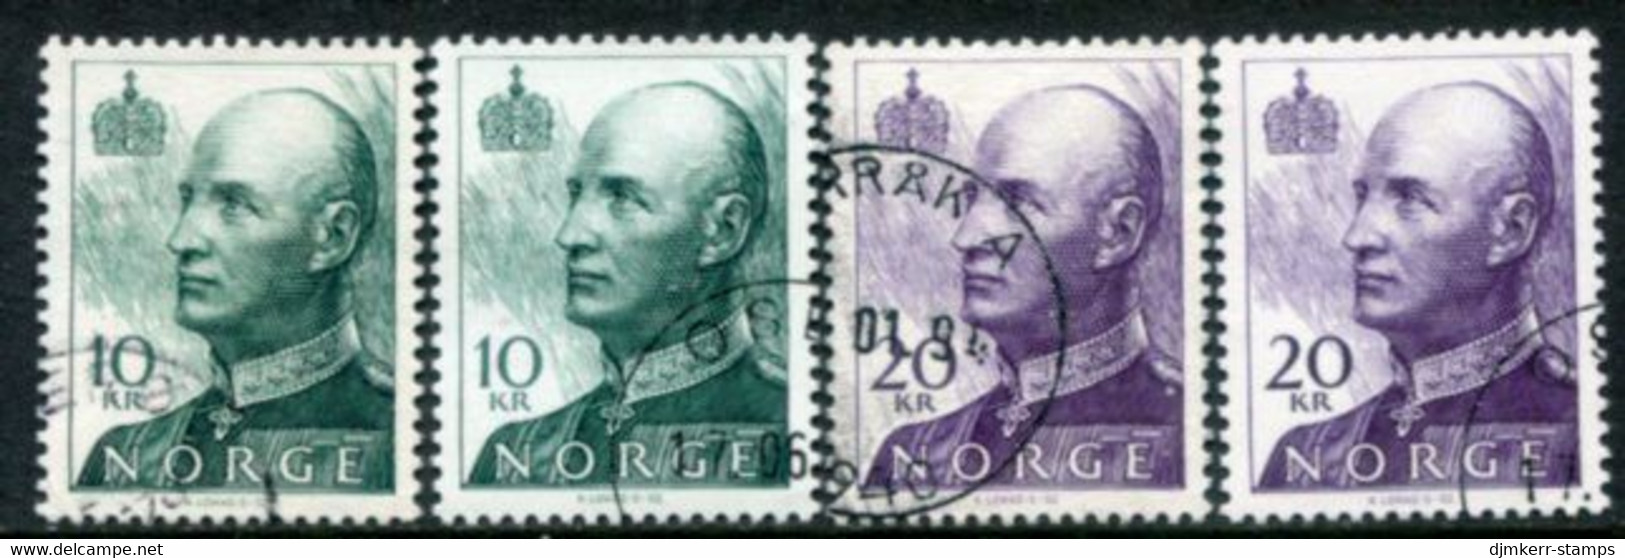 NORWAY 1993) Definitive: King Harald V 10 Kr. 20 Kr. On Ordinary And Phosphor Papers Used.   Michel 1131-32x,y - Gebraucht